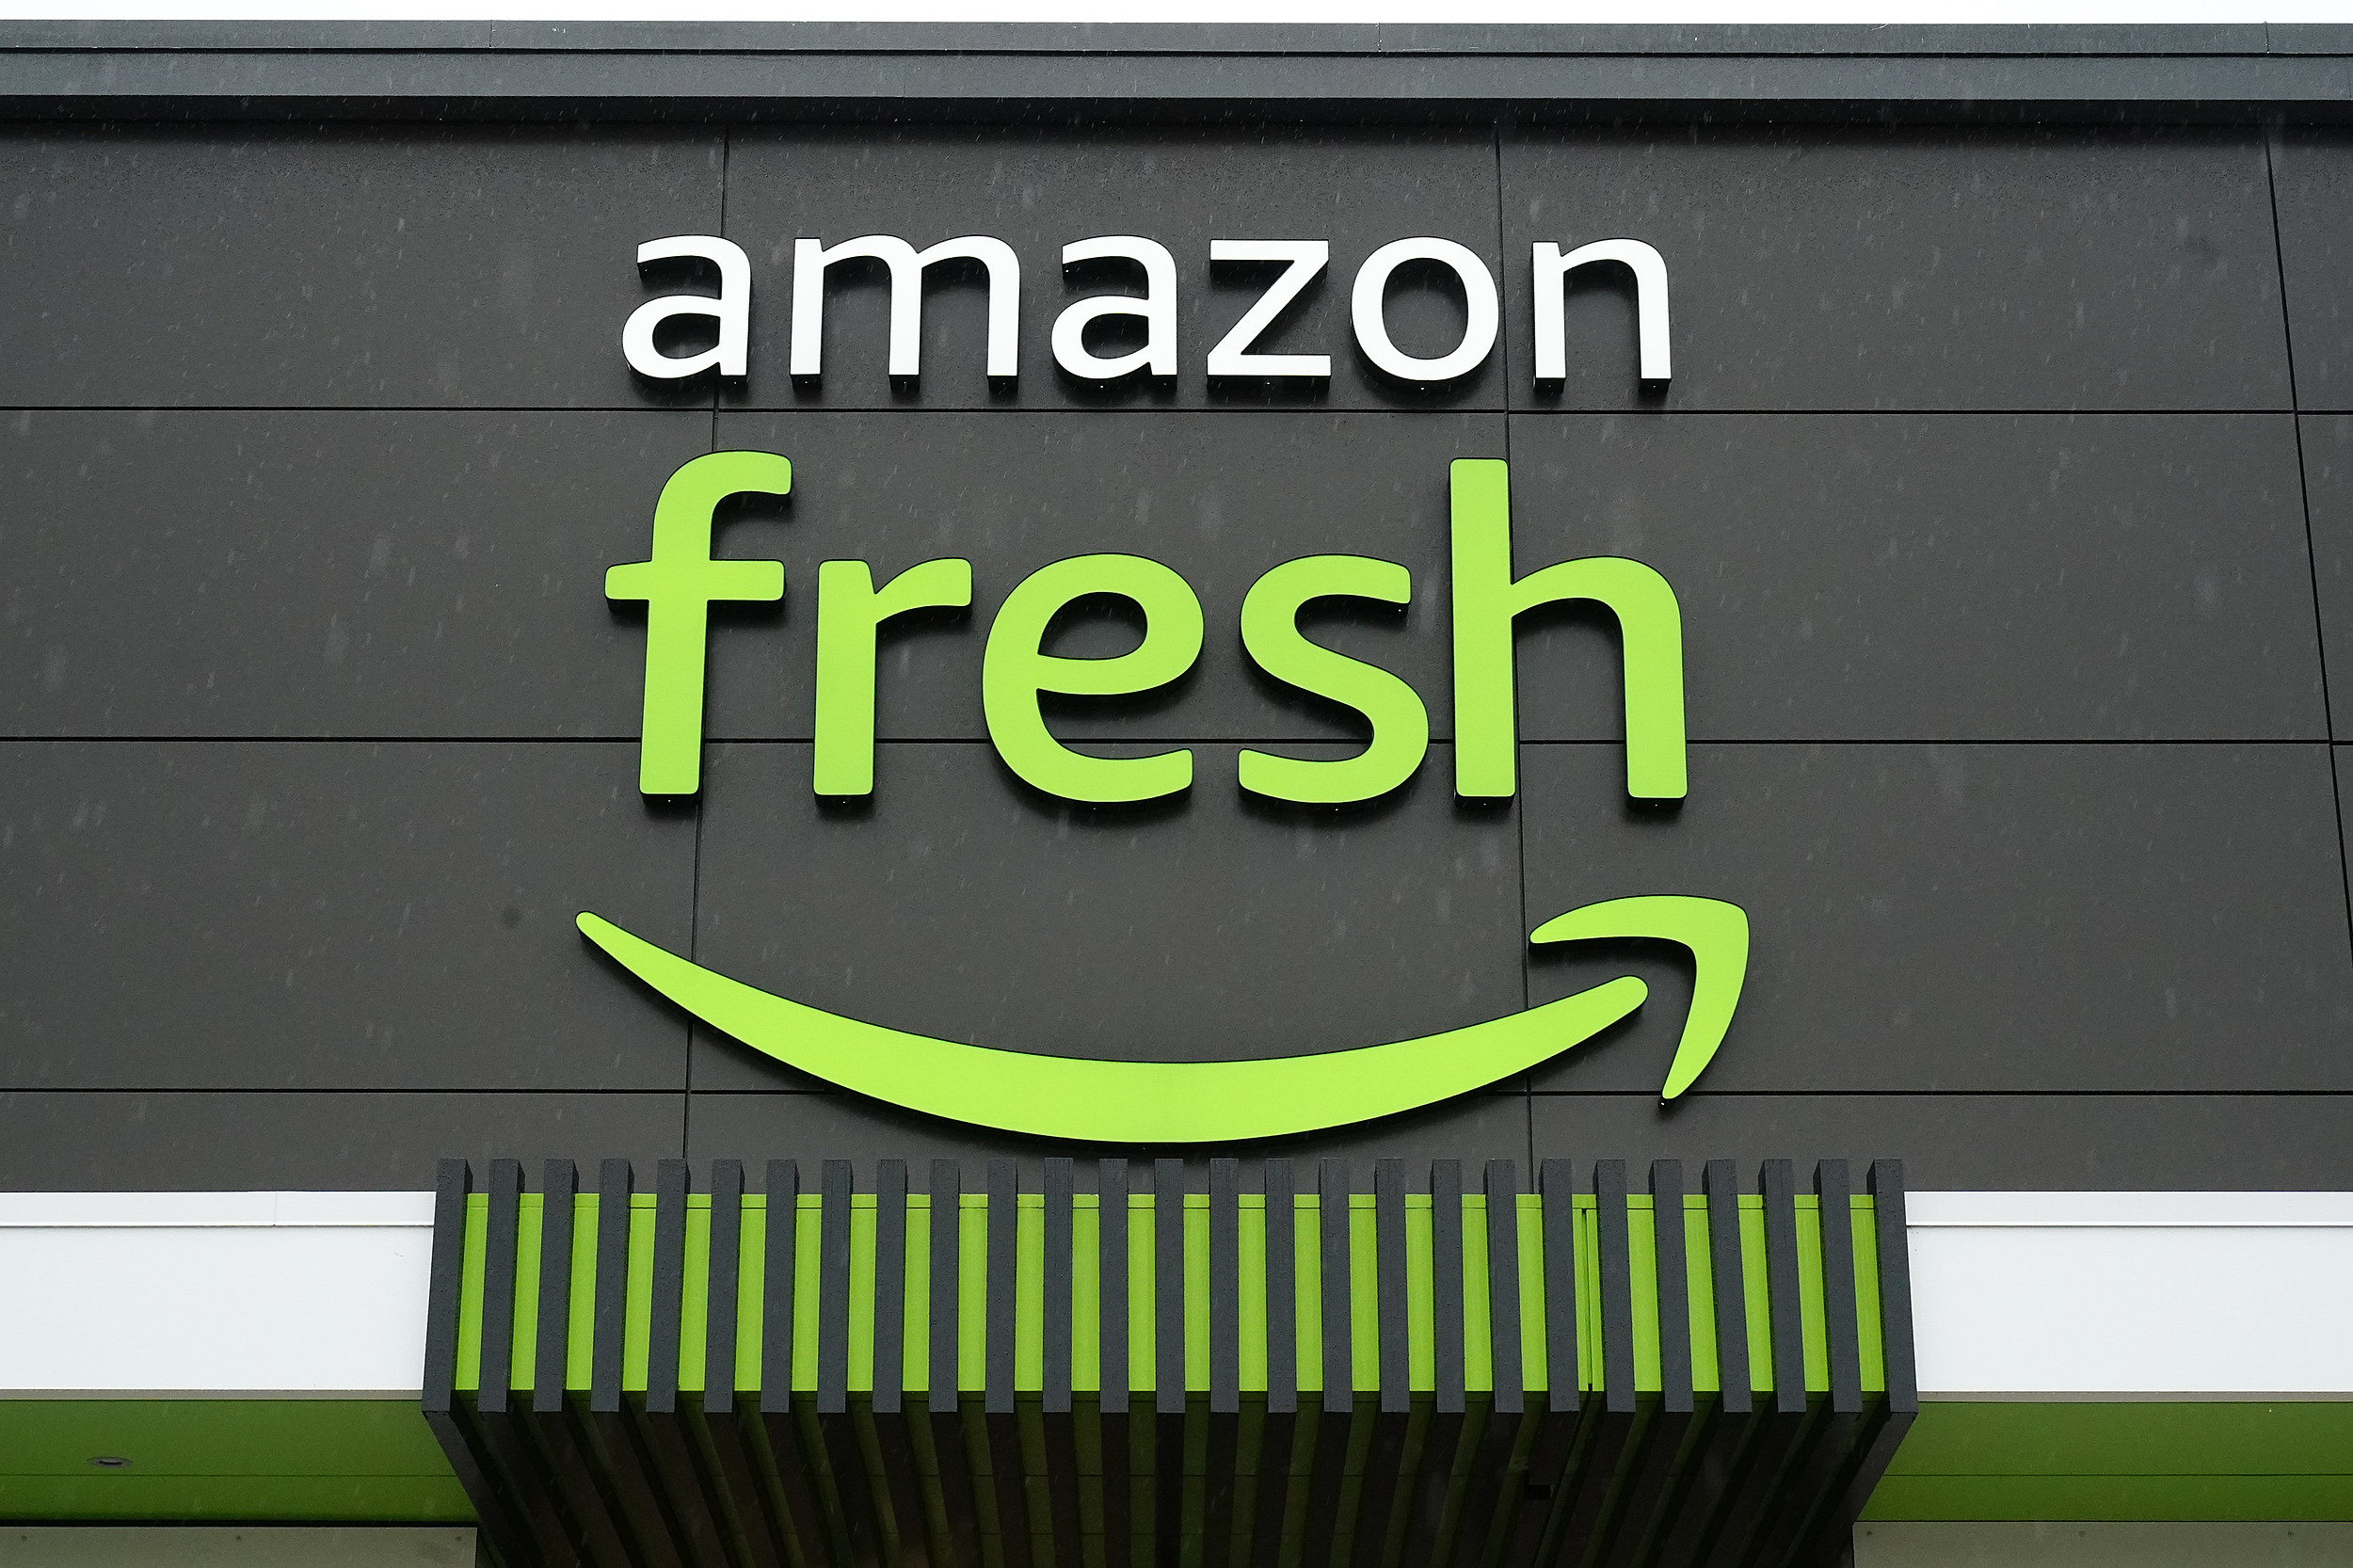 New Jersey's first Amazon Fresh store should be open this summer